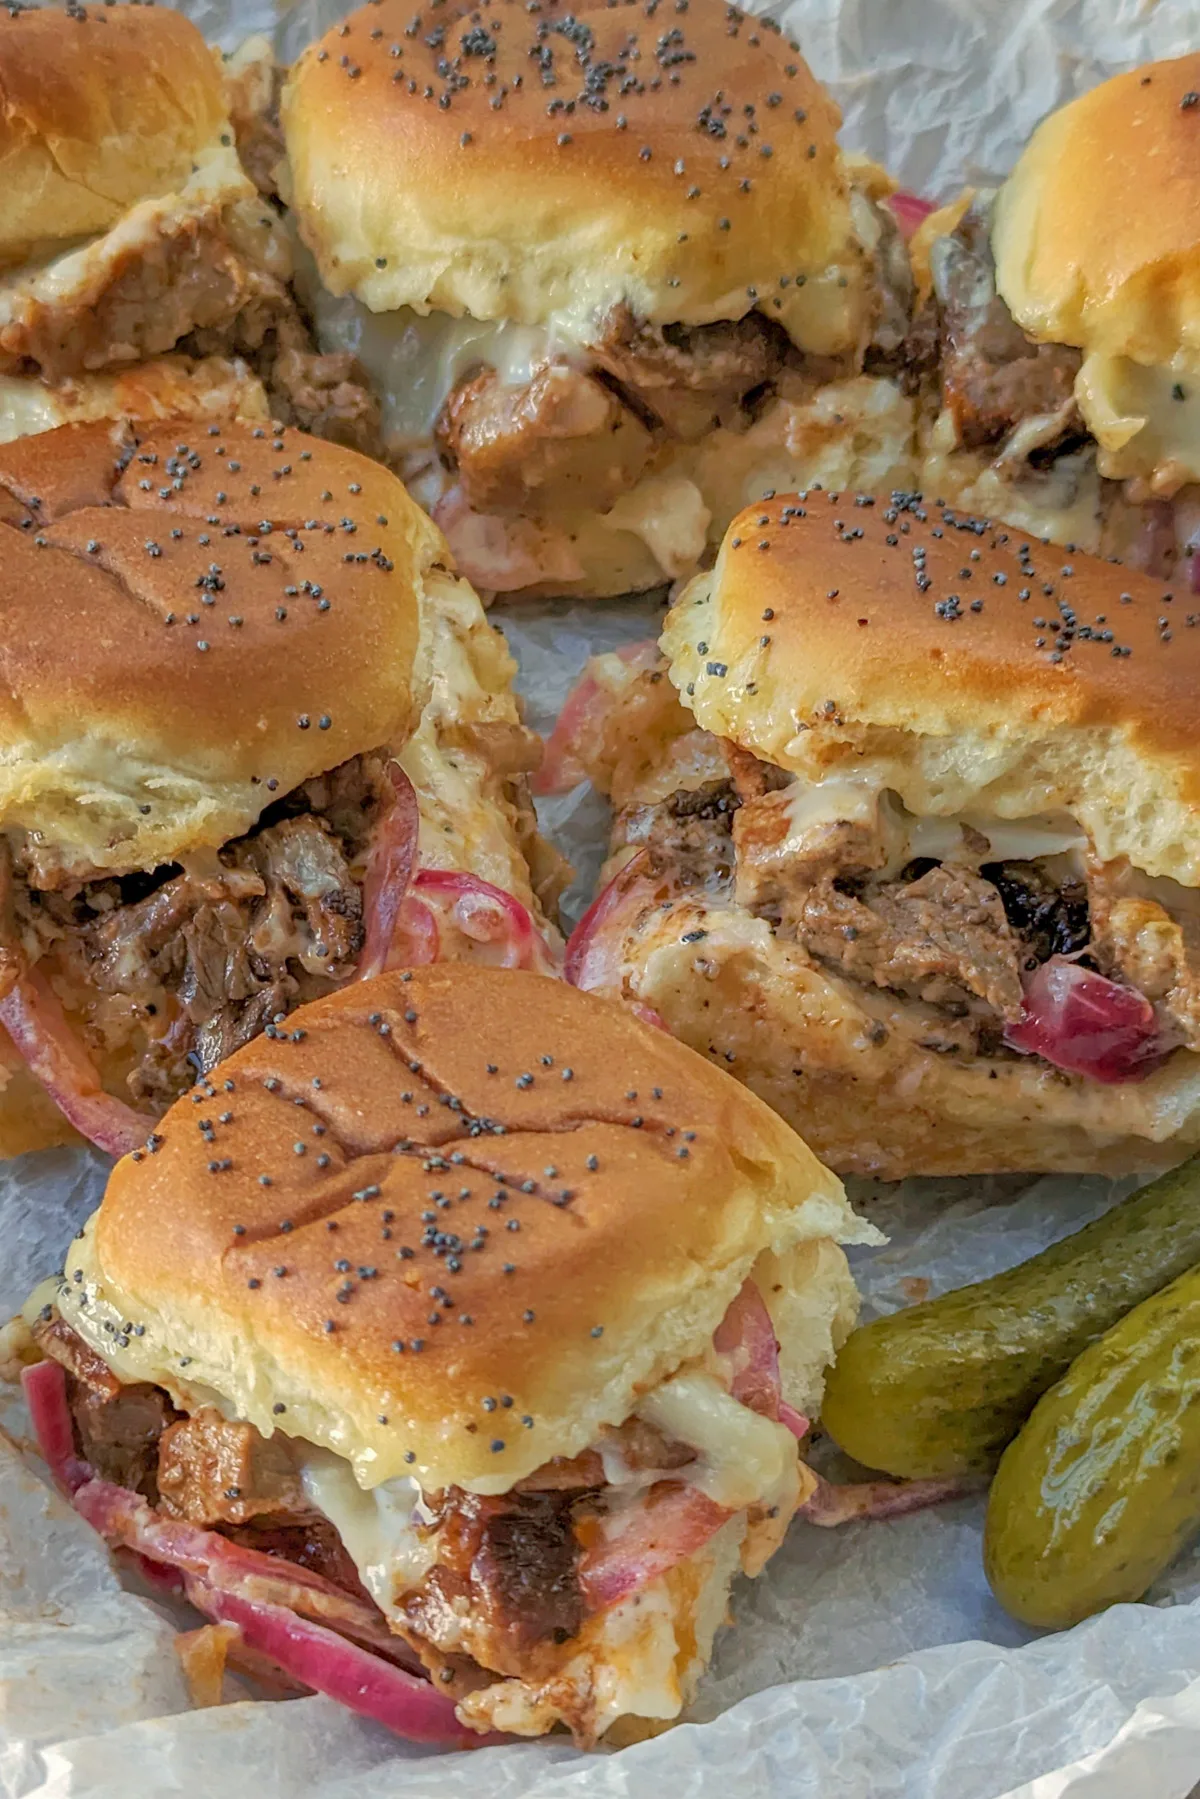 A serving tray of brisket sliders.